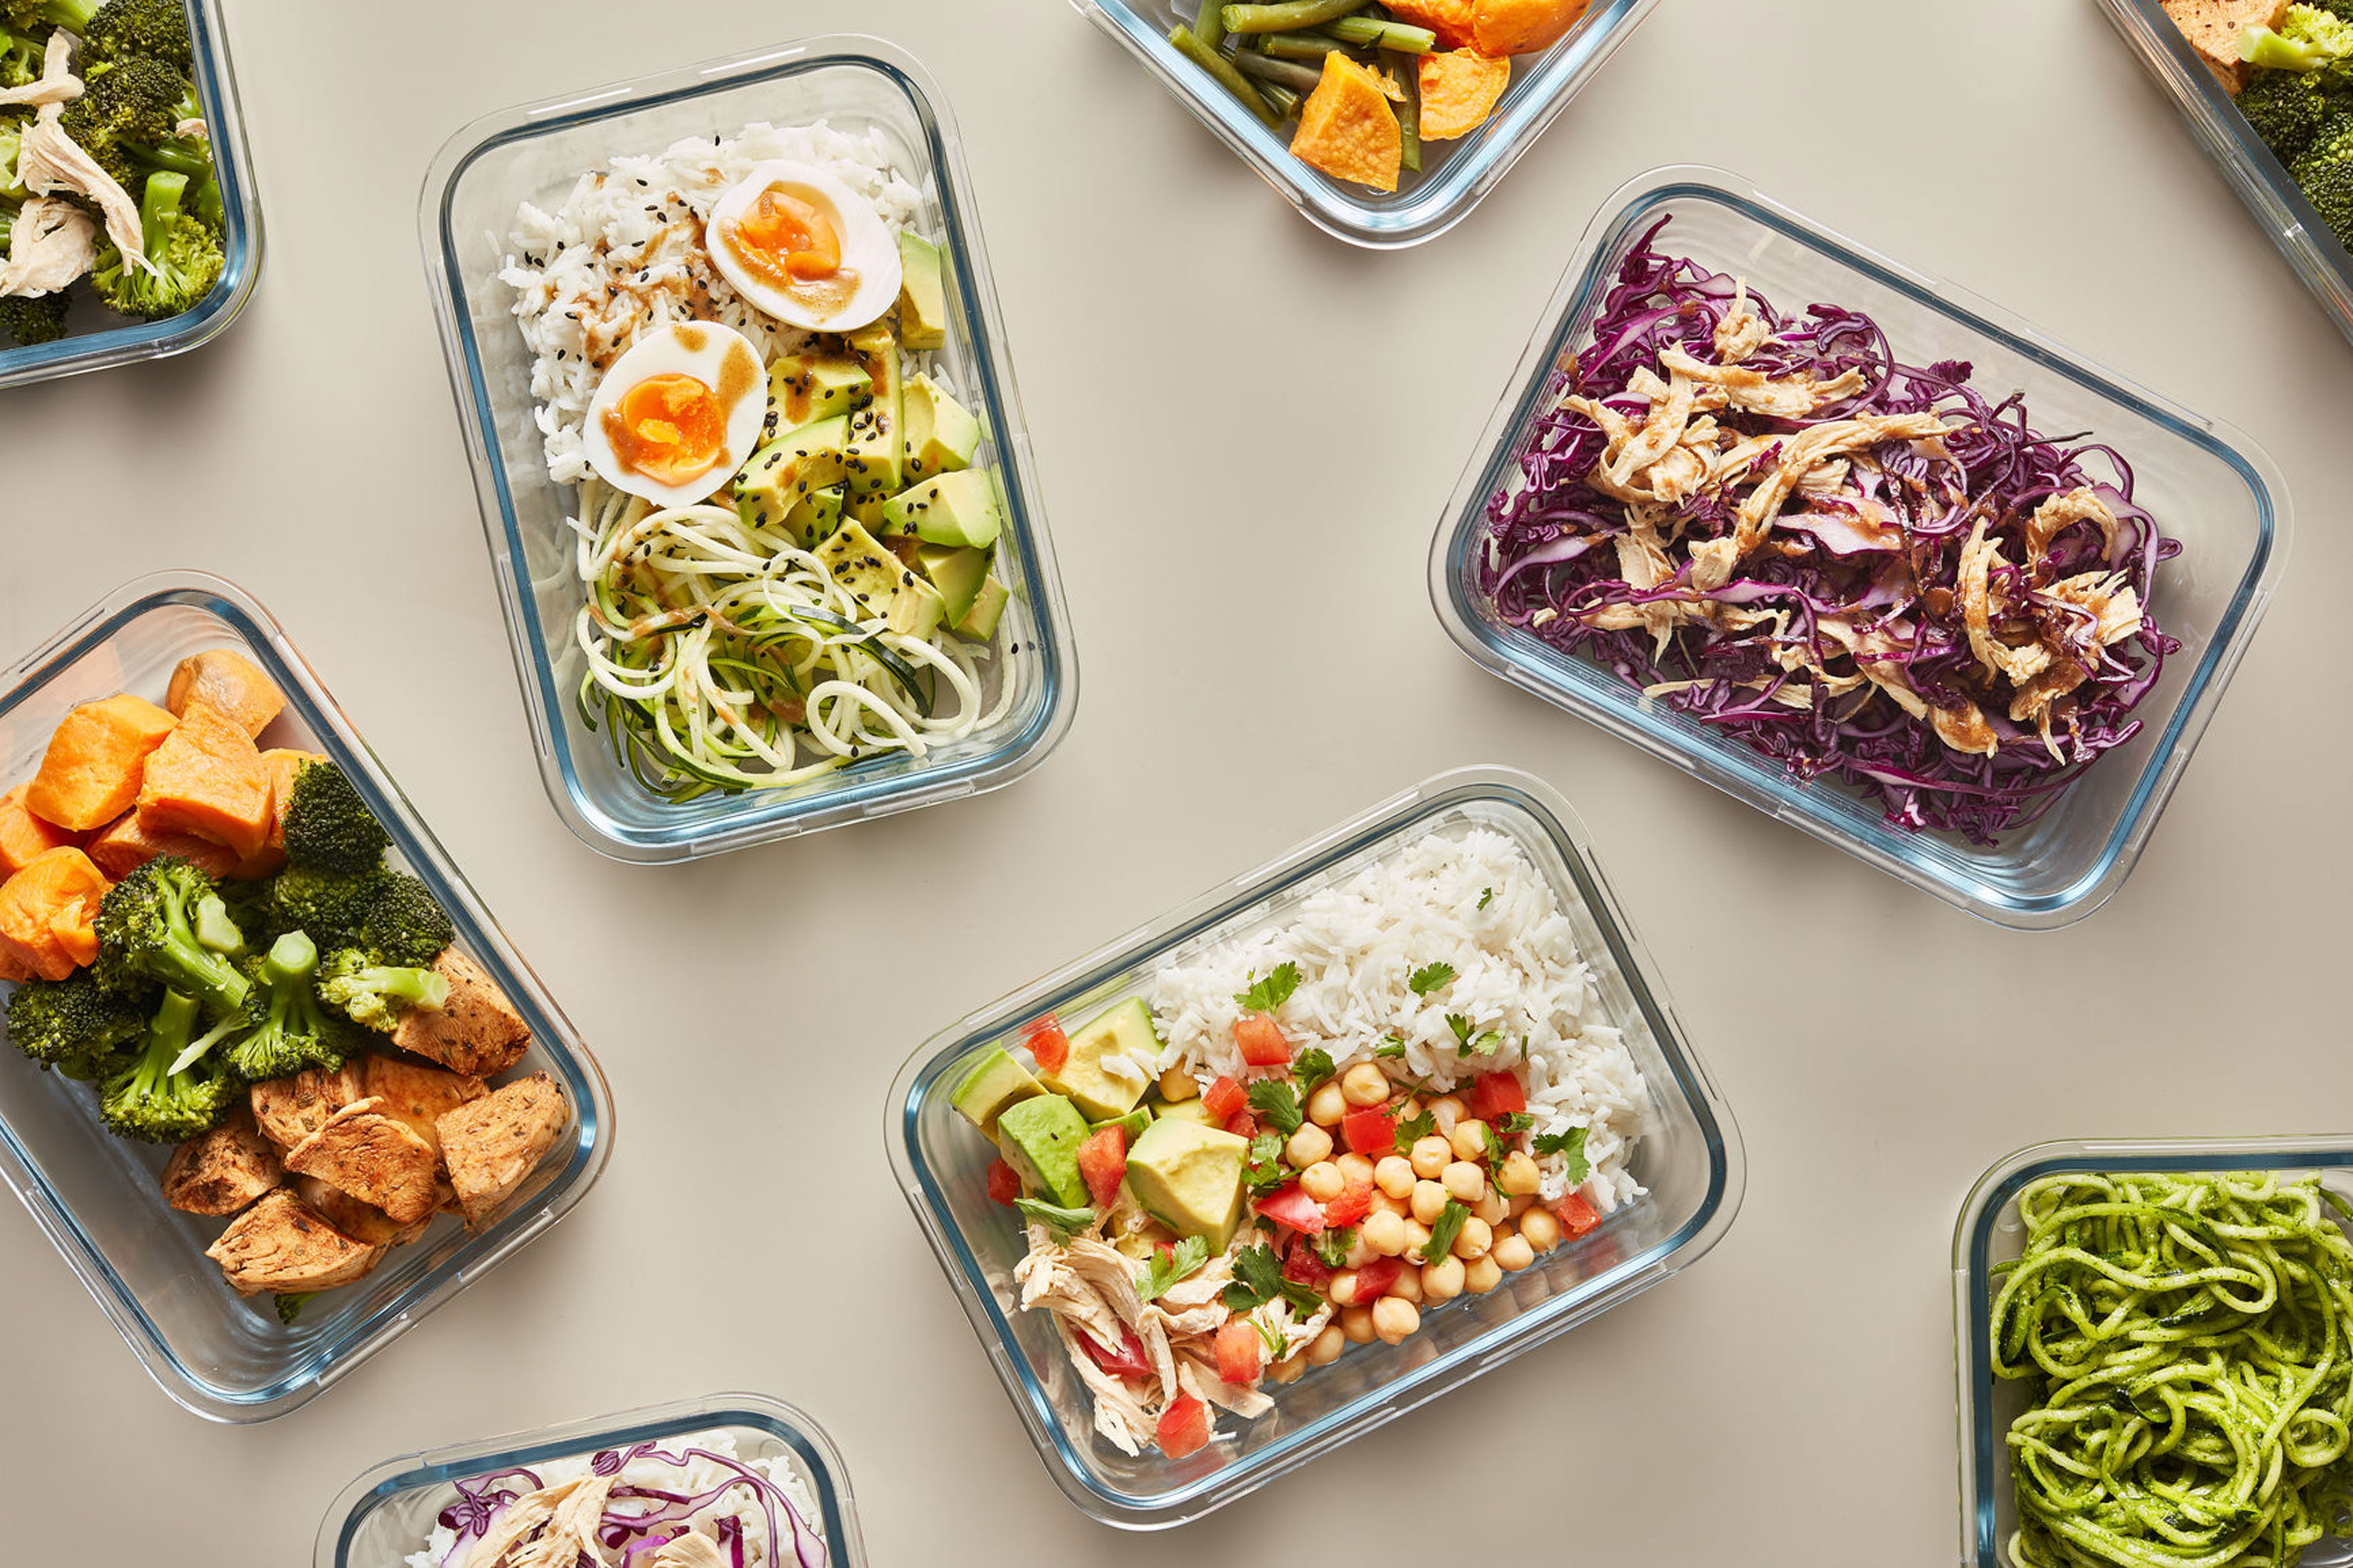 THIS JUST THIN… Meal prepping is key for me (at least for lunches)! E, meal preparation